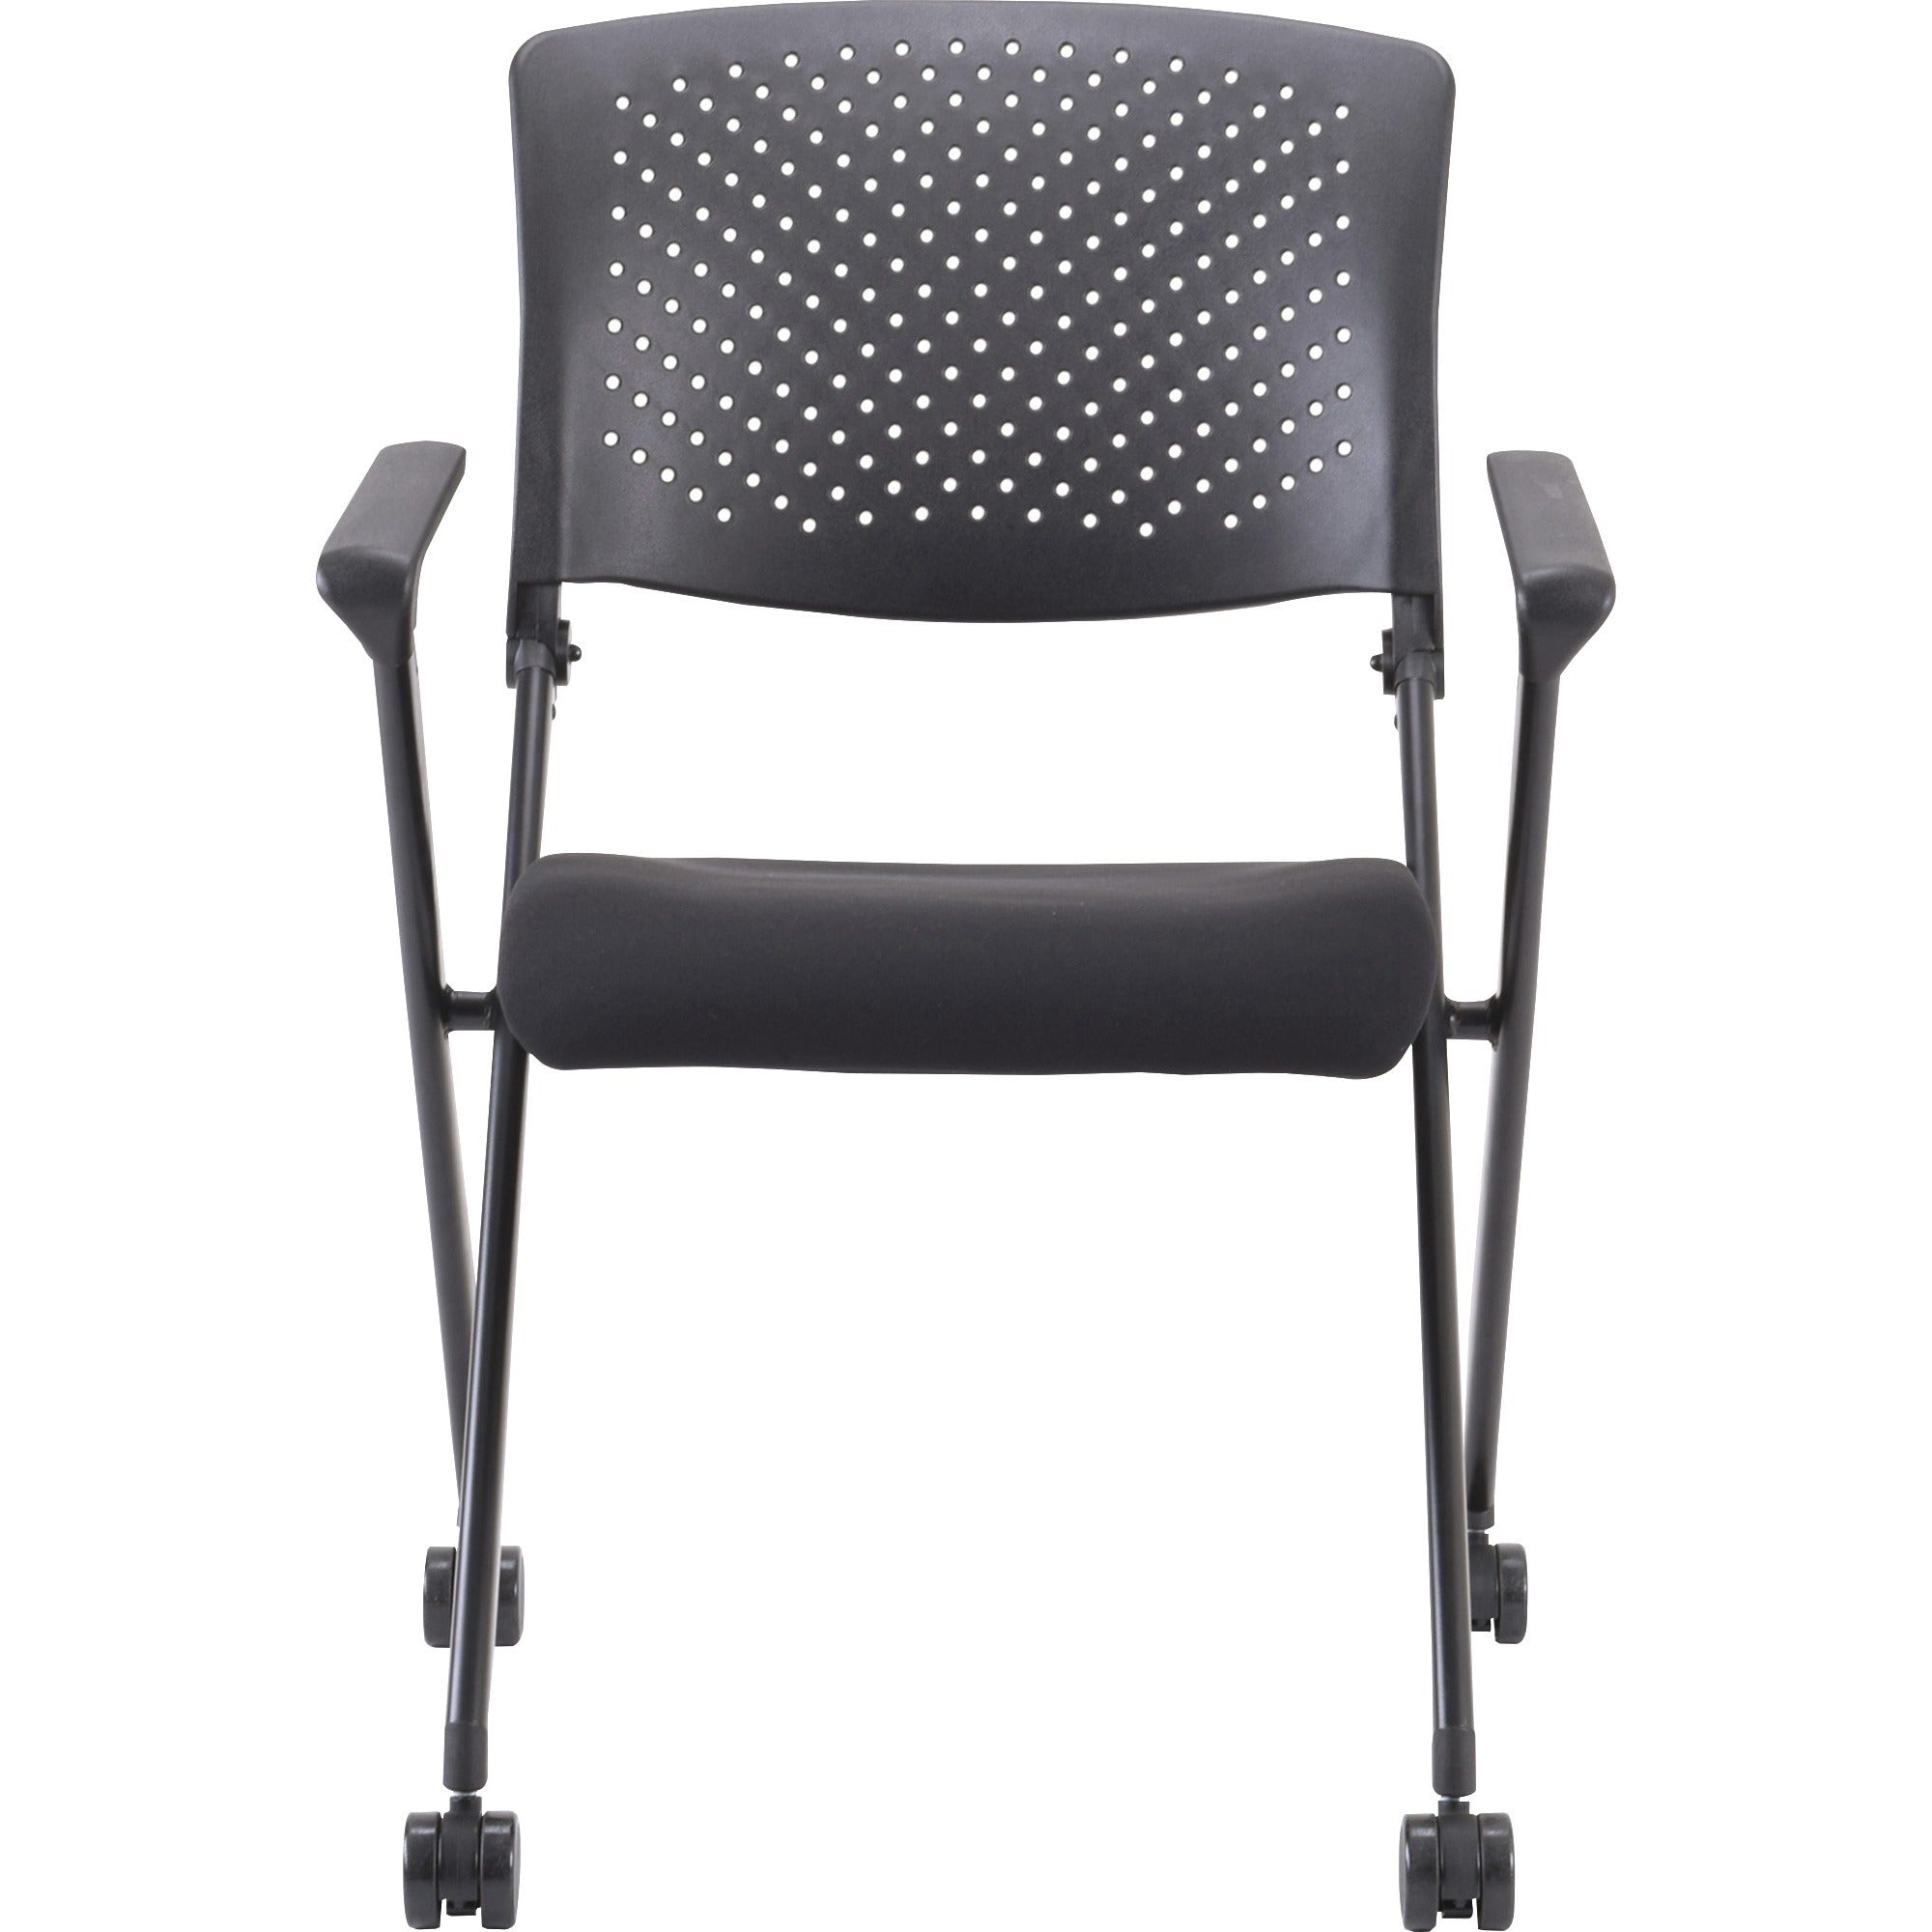 lorell-upholstered-foldable-nesting-chairs-with-arms-black-fabric-seat-black-plastic-back-metal-frame-2-carton_llr41847 - 2